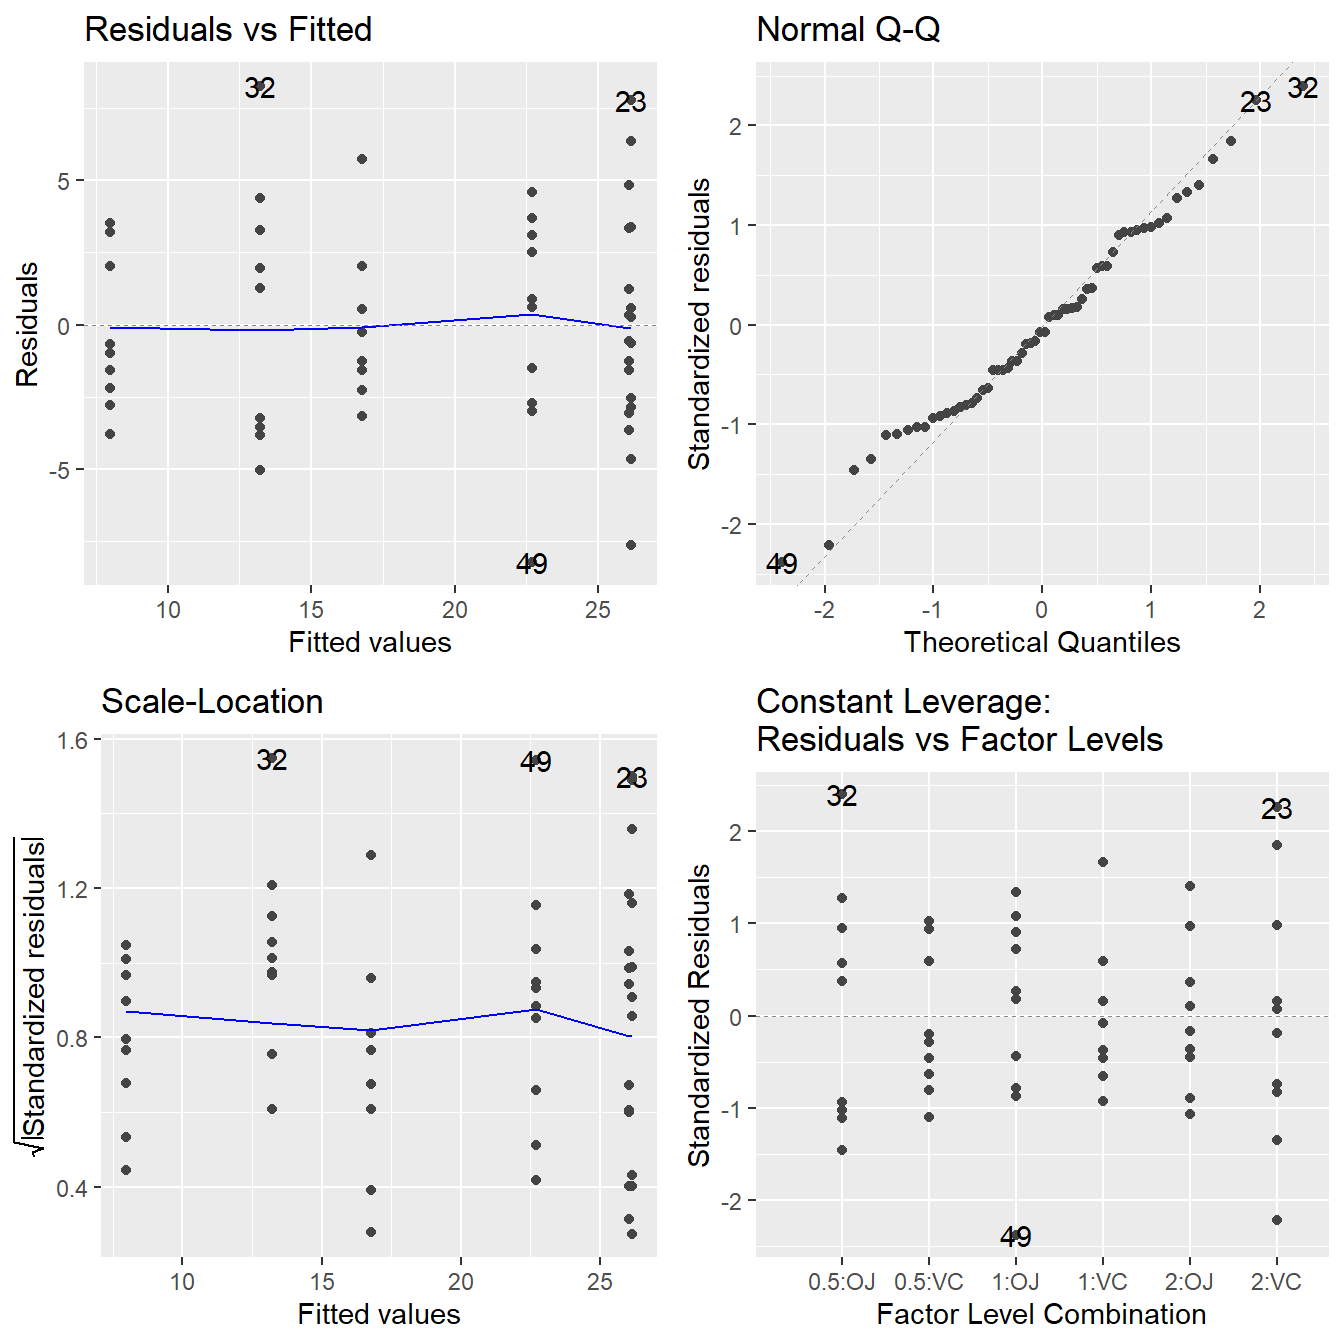 Residual diagnostic plots when the response variable is the tooth length as a function of supplement and dosage. Here, the residuals appear fairly homoskedastic based on the Residuals vs Fitted and Scale-Location plots. The normality assumption is satisfied based on the Normal Q-Q plot.